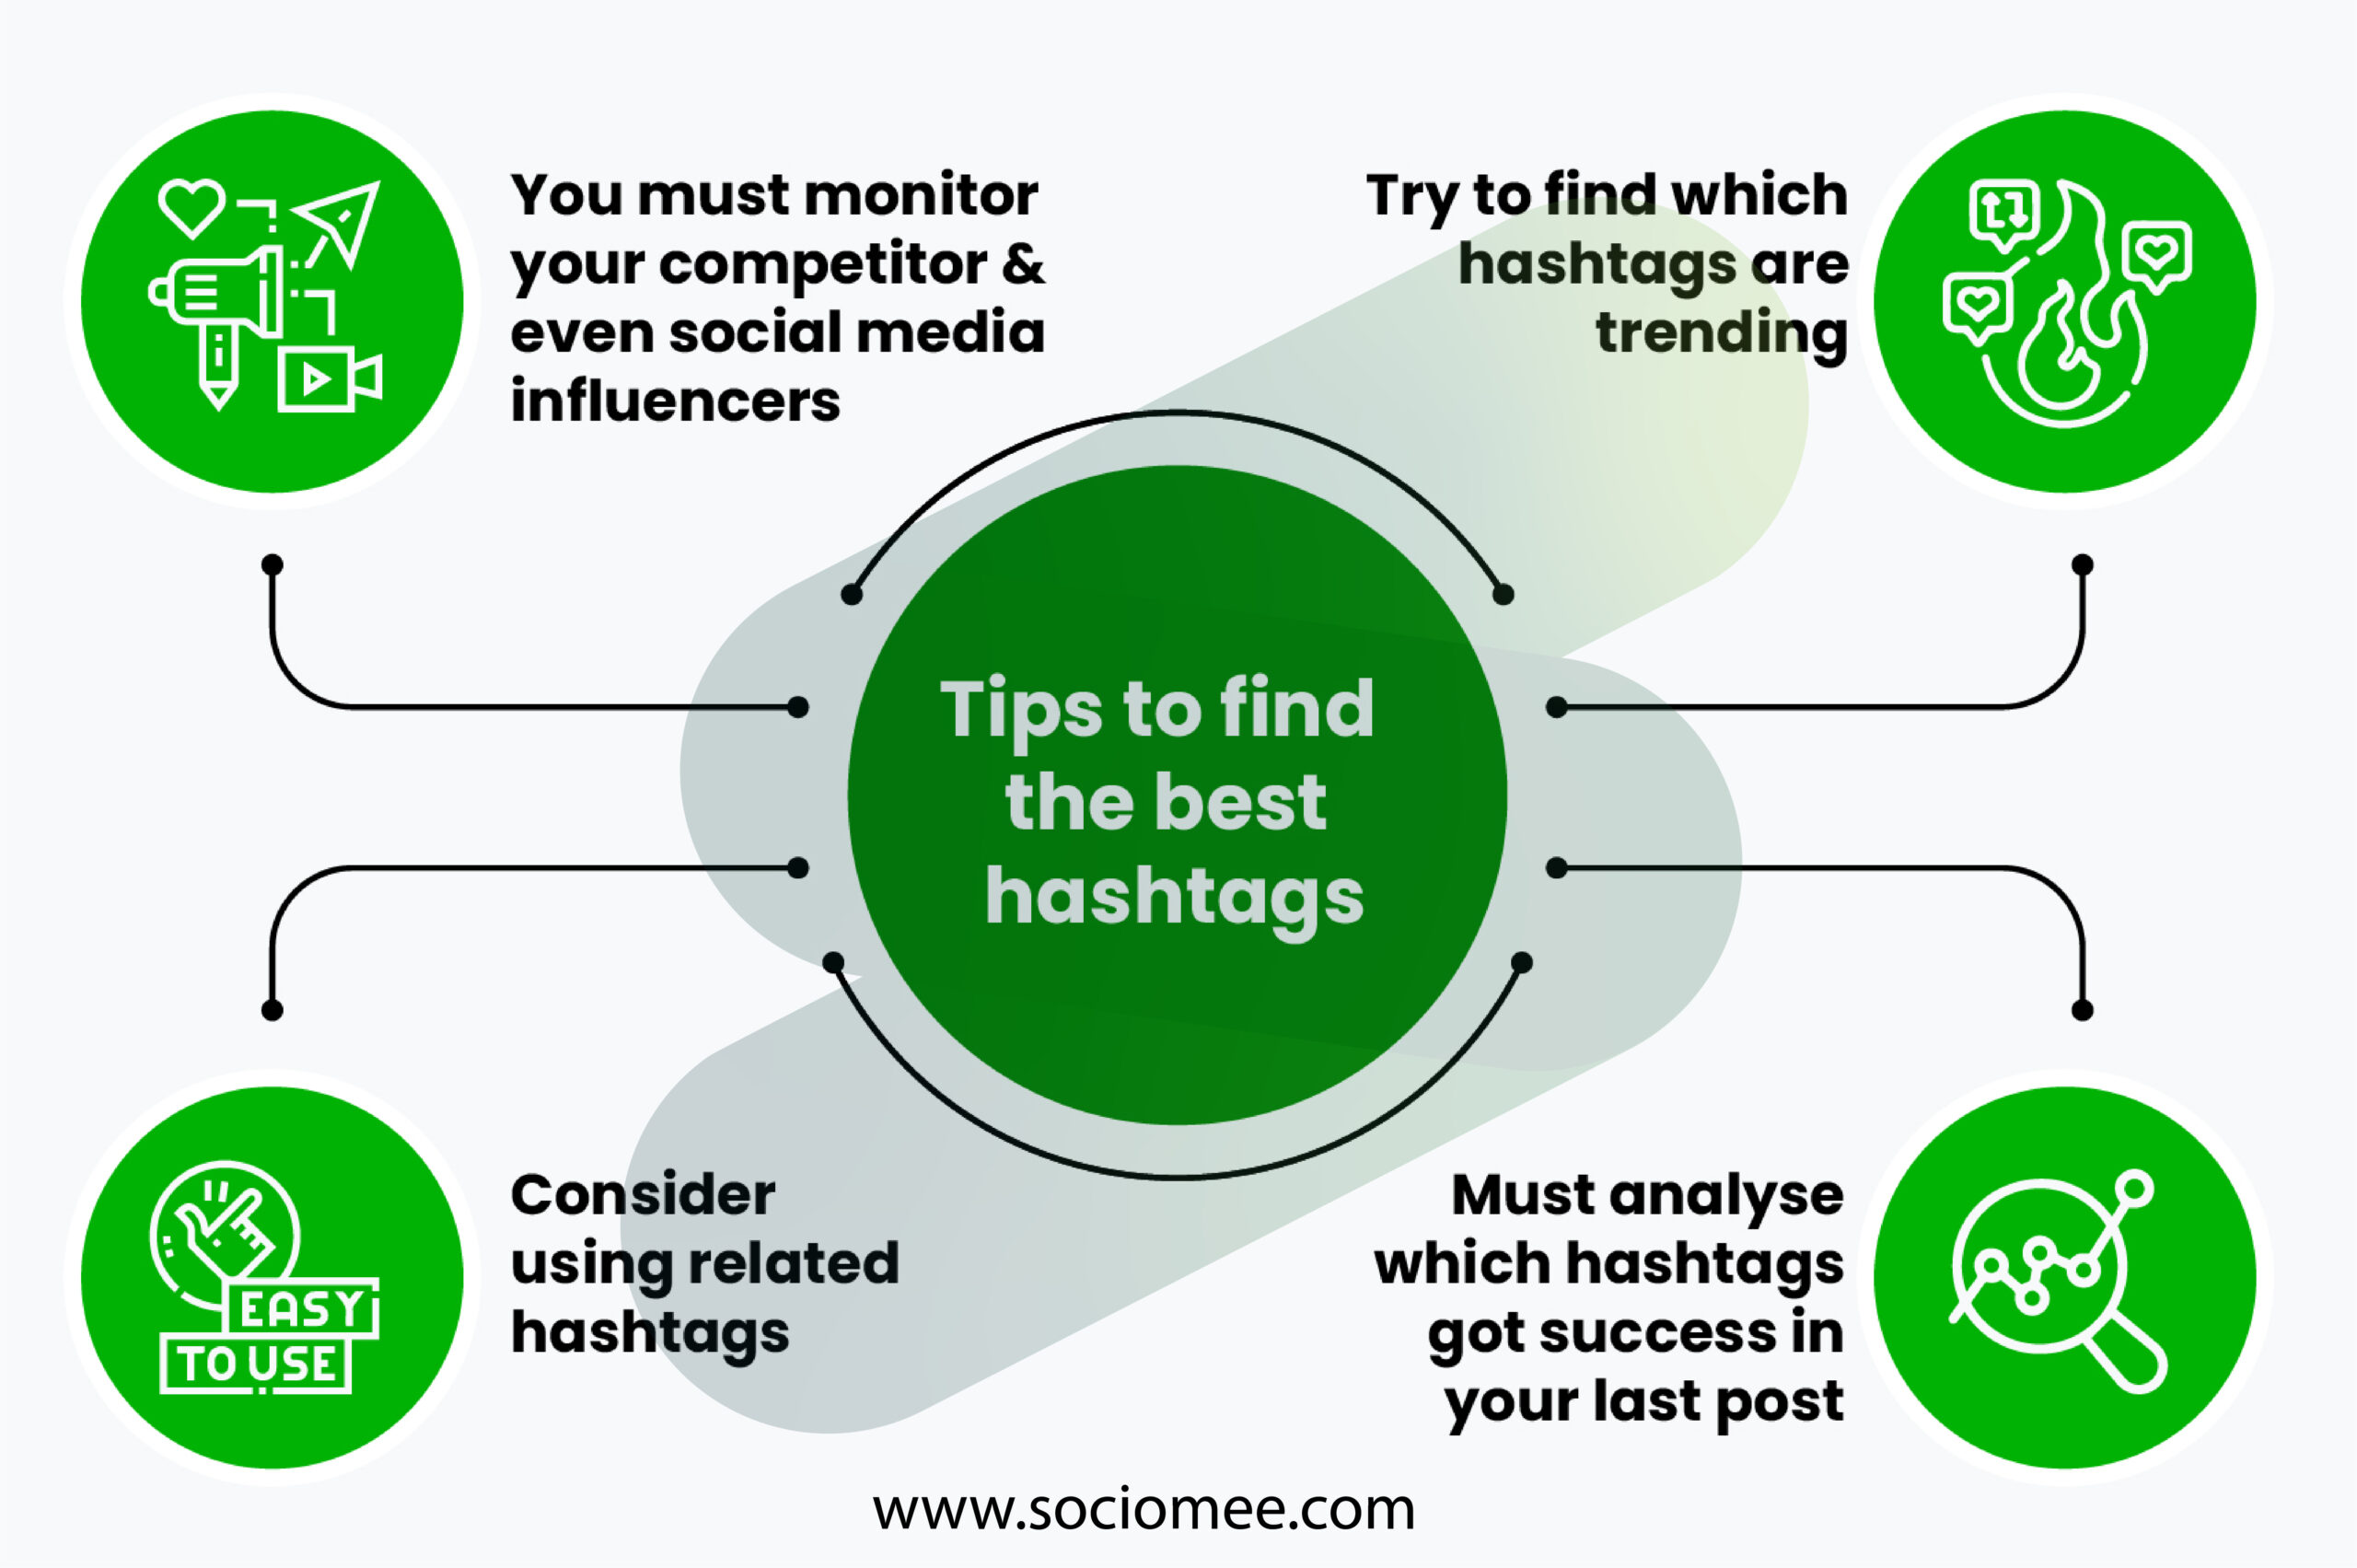 Tips to find the best hashtags